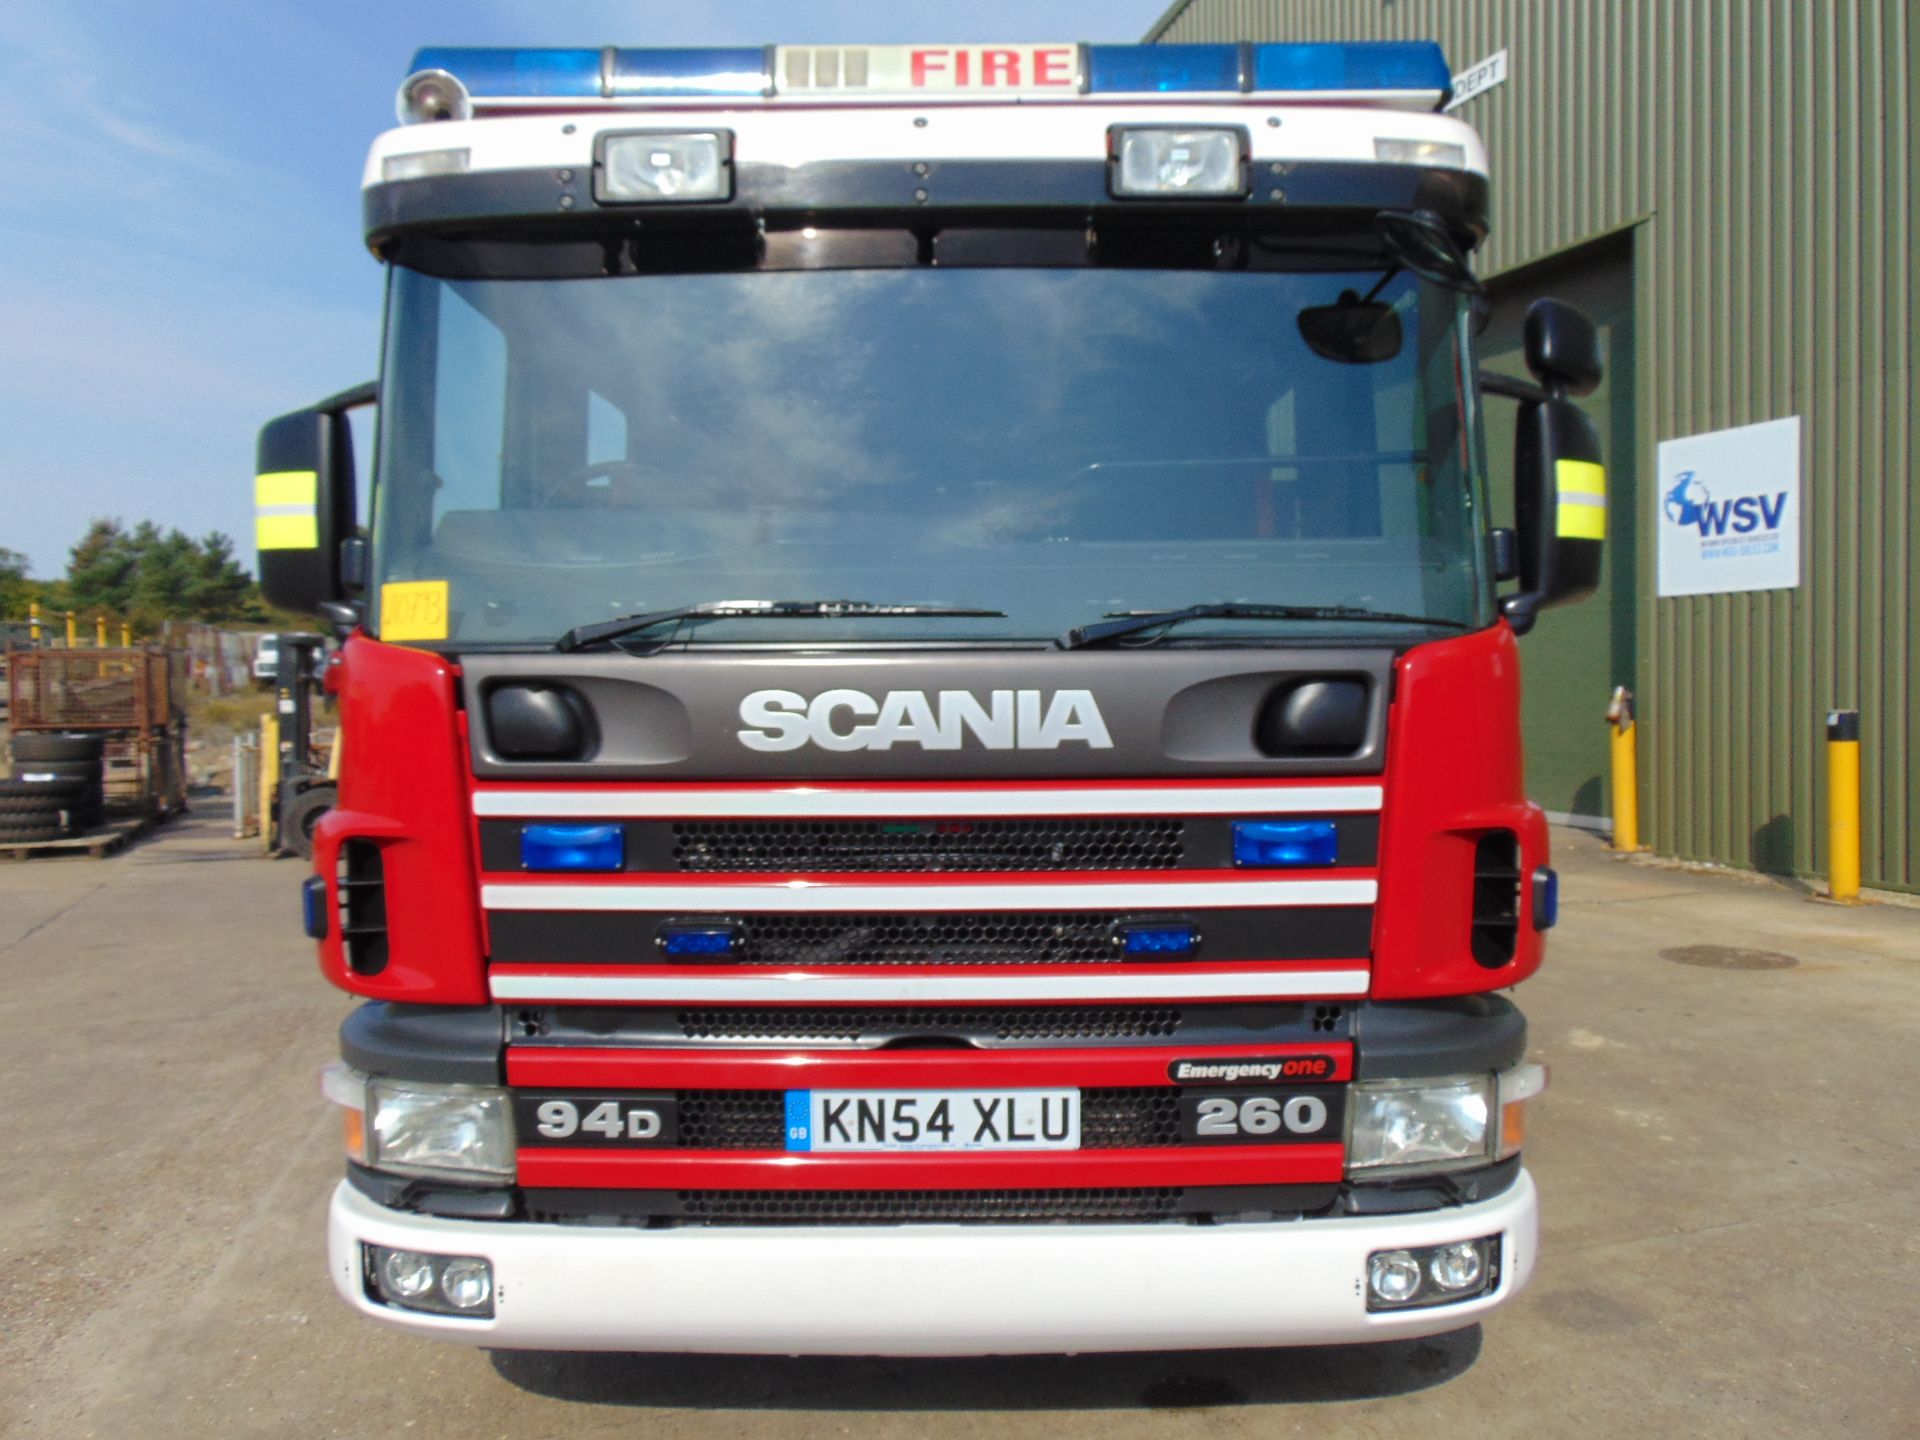 Scania 94D 260 / Emergency One Fire Engine Exceptionally Clean ONLY 68,050km! - Image 3 of 48